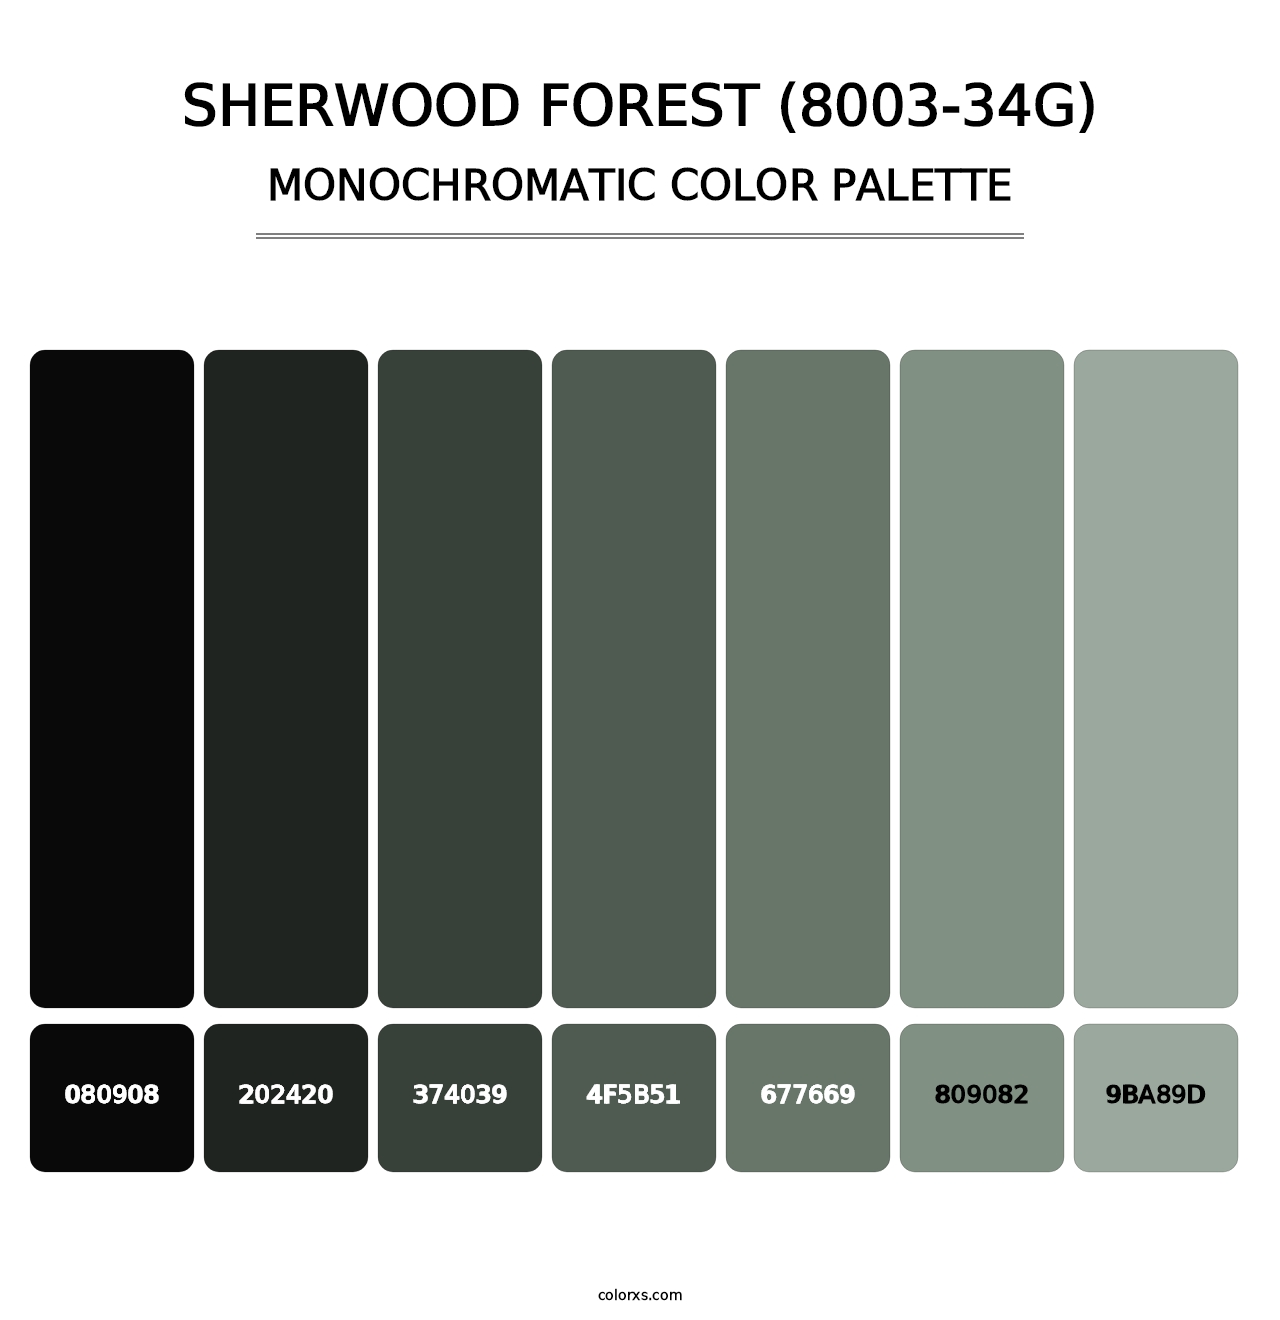 Sherwood Forest (8003-34G) - Monochromatic Color Palette